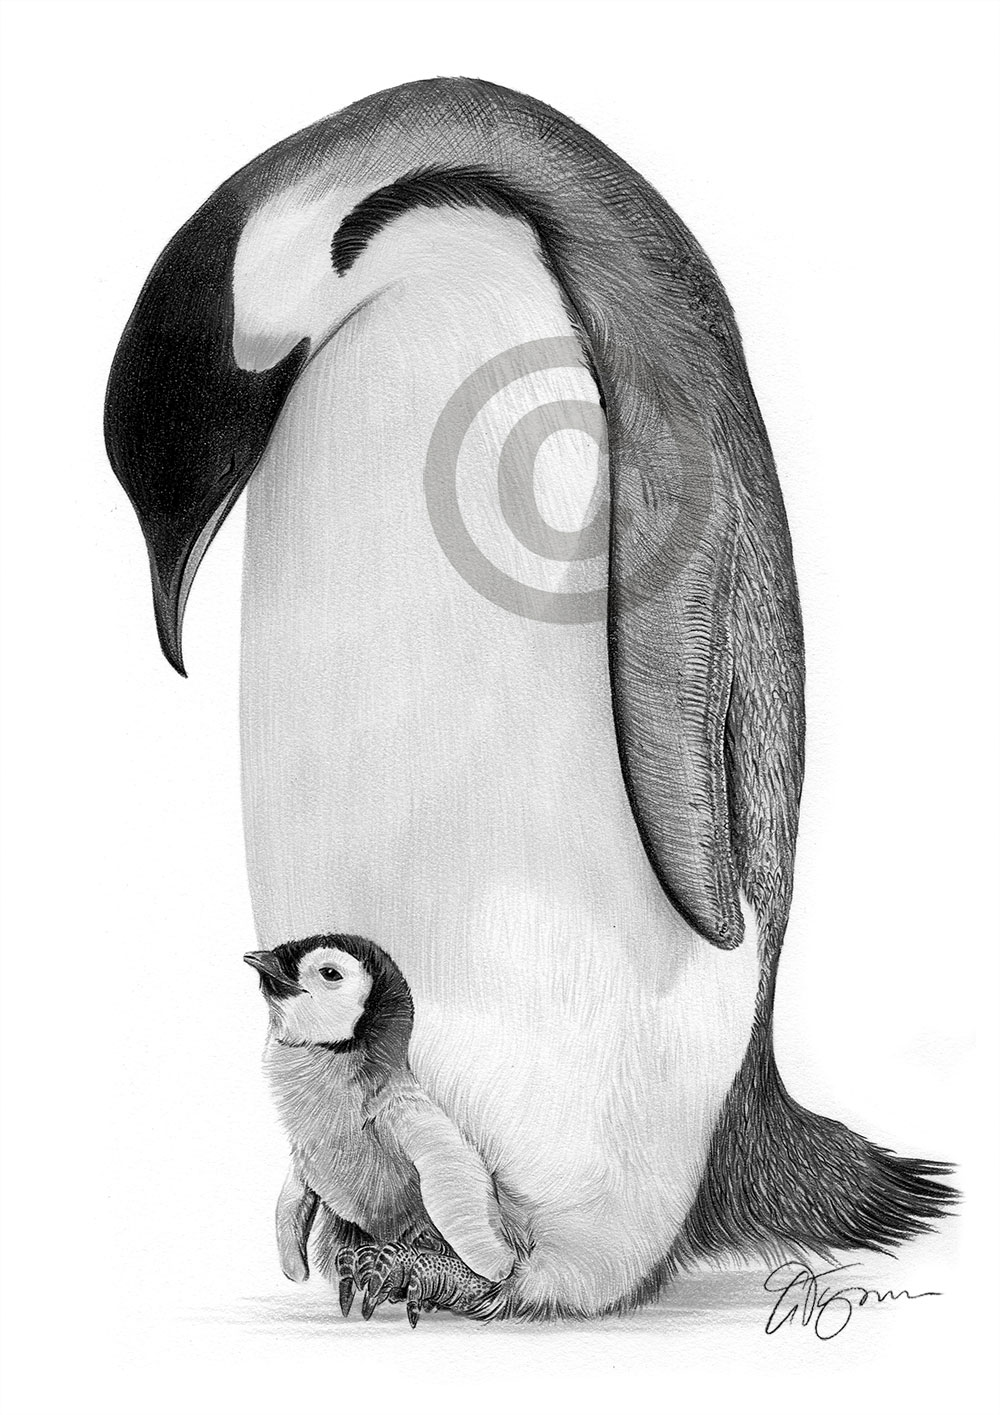 Pencil drawing of an emperor penguin by UK artist Gary Tymon